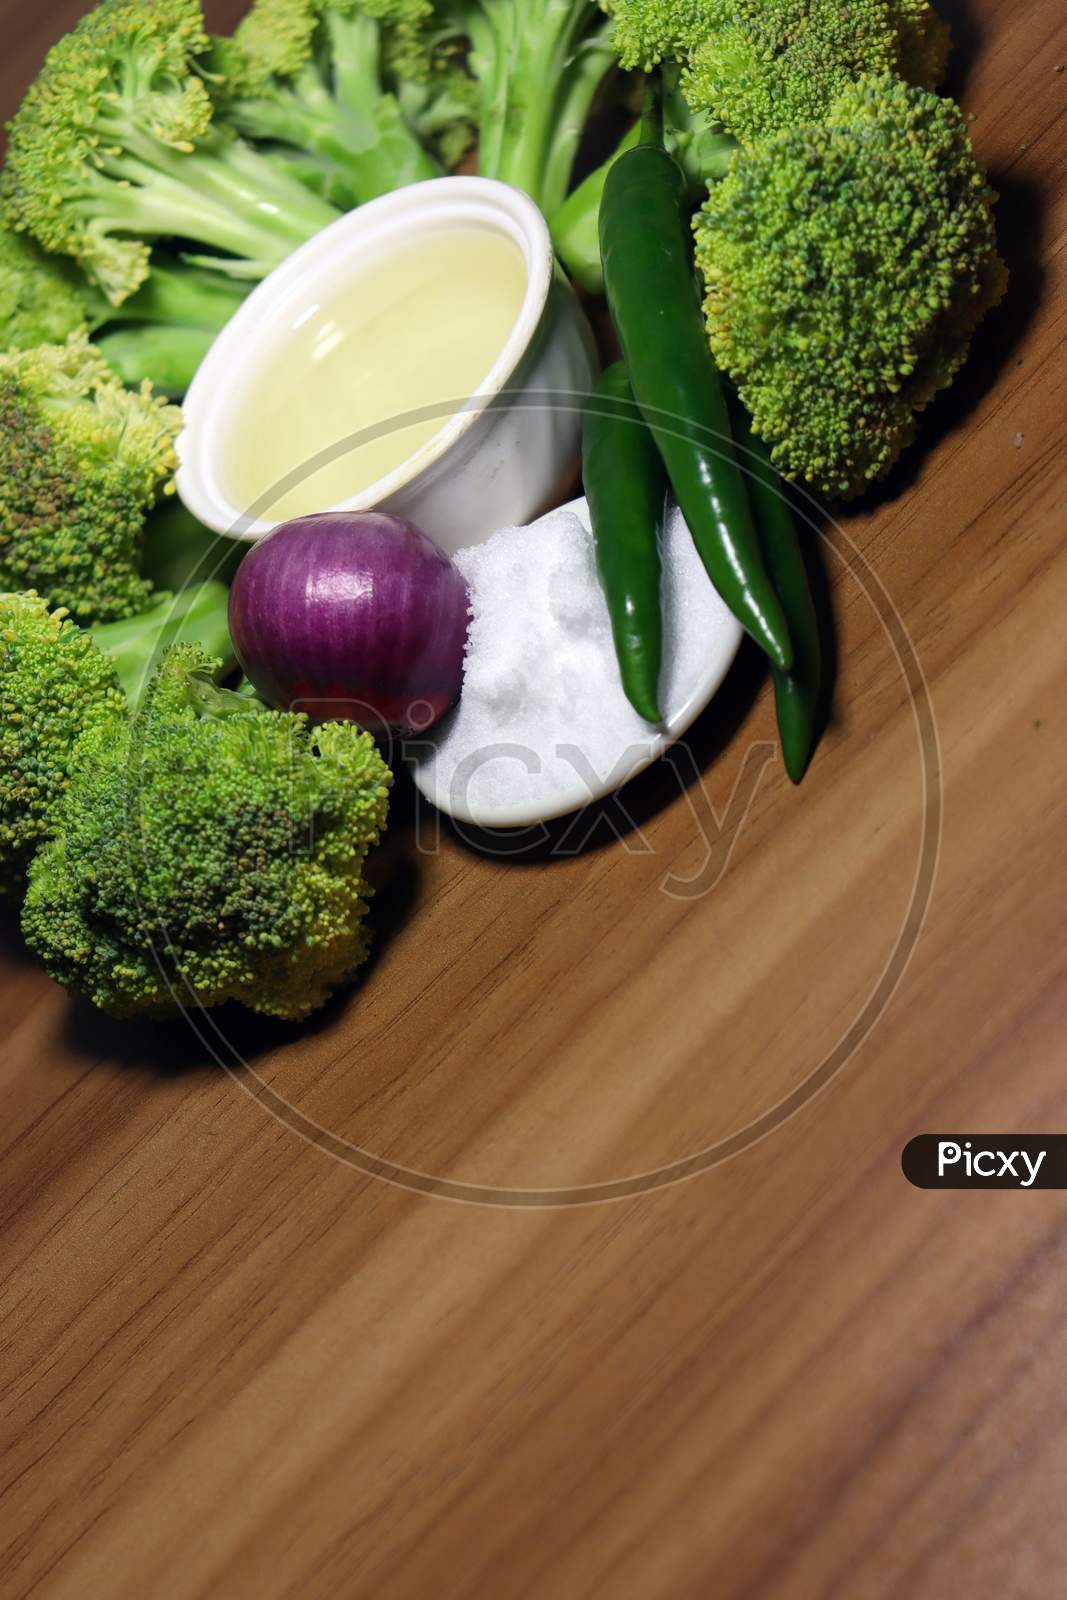 Sliced Broccoli With Spices Stock On Wooden Table